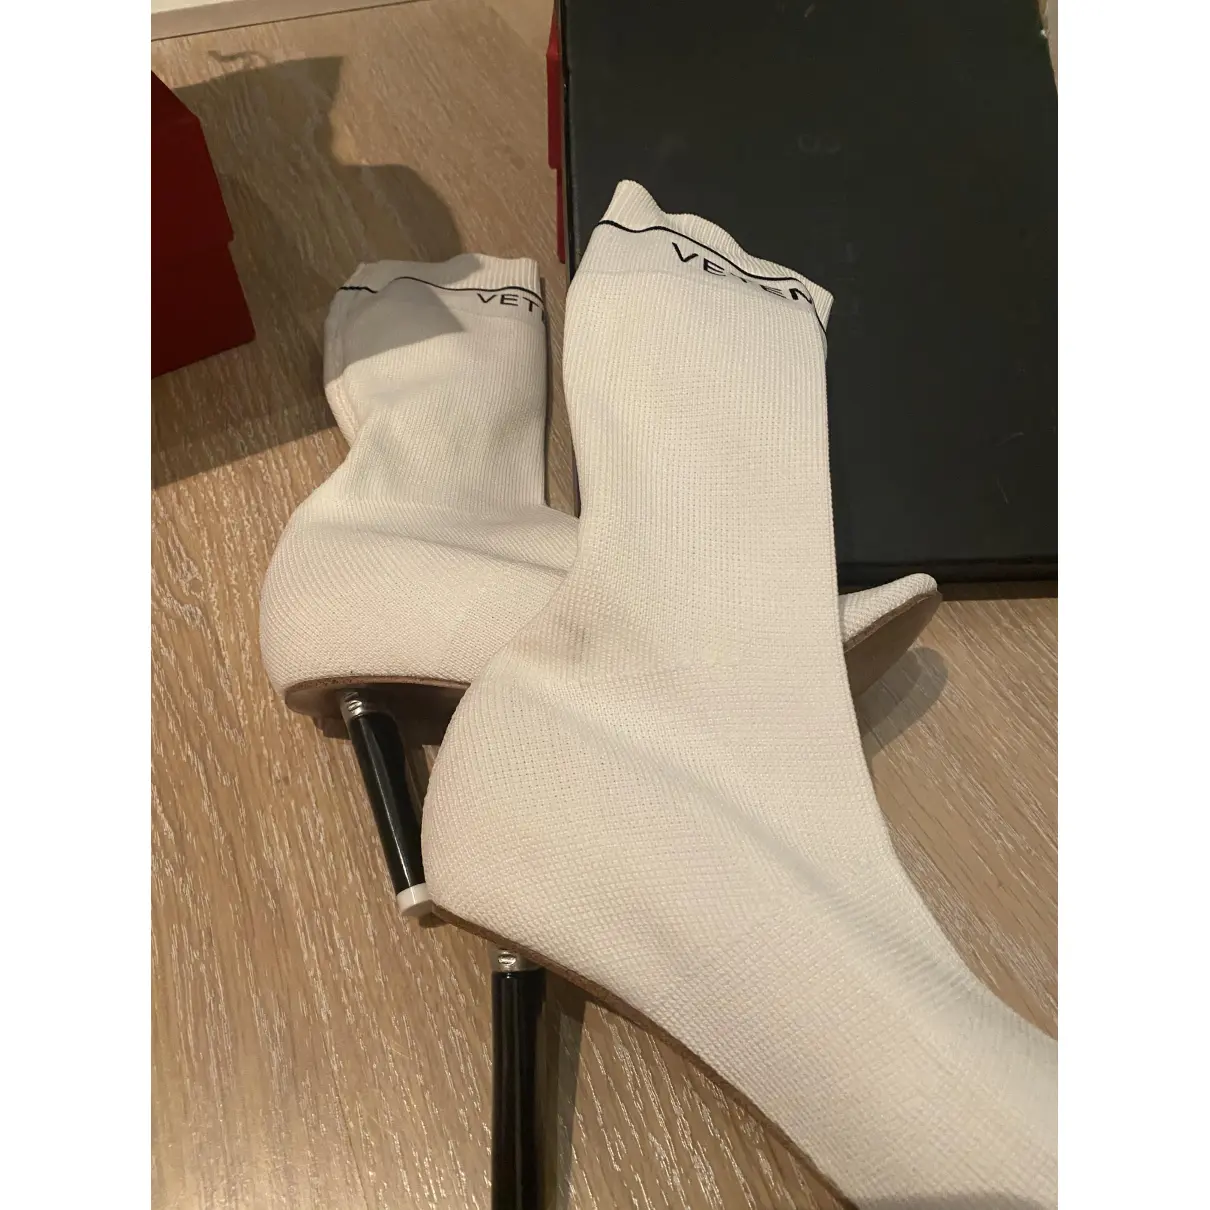 Buy Vetements Cloth ankle boots online